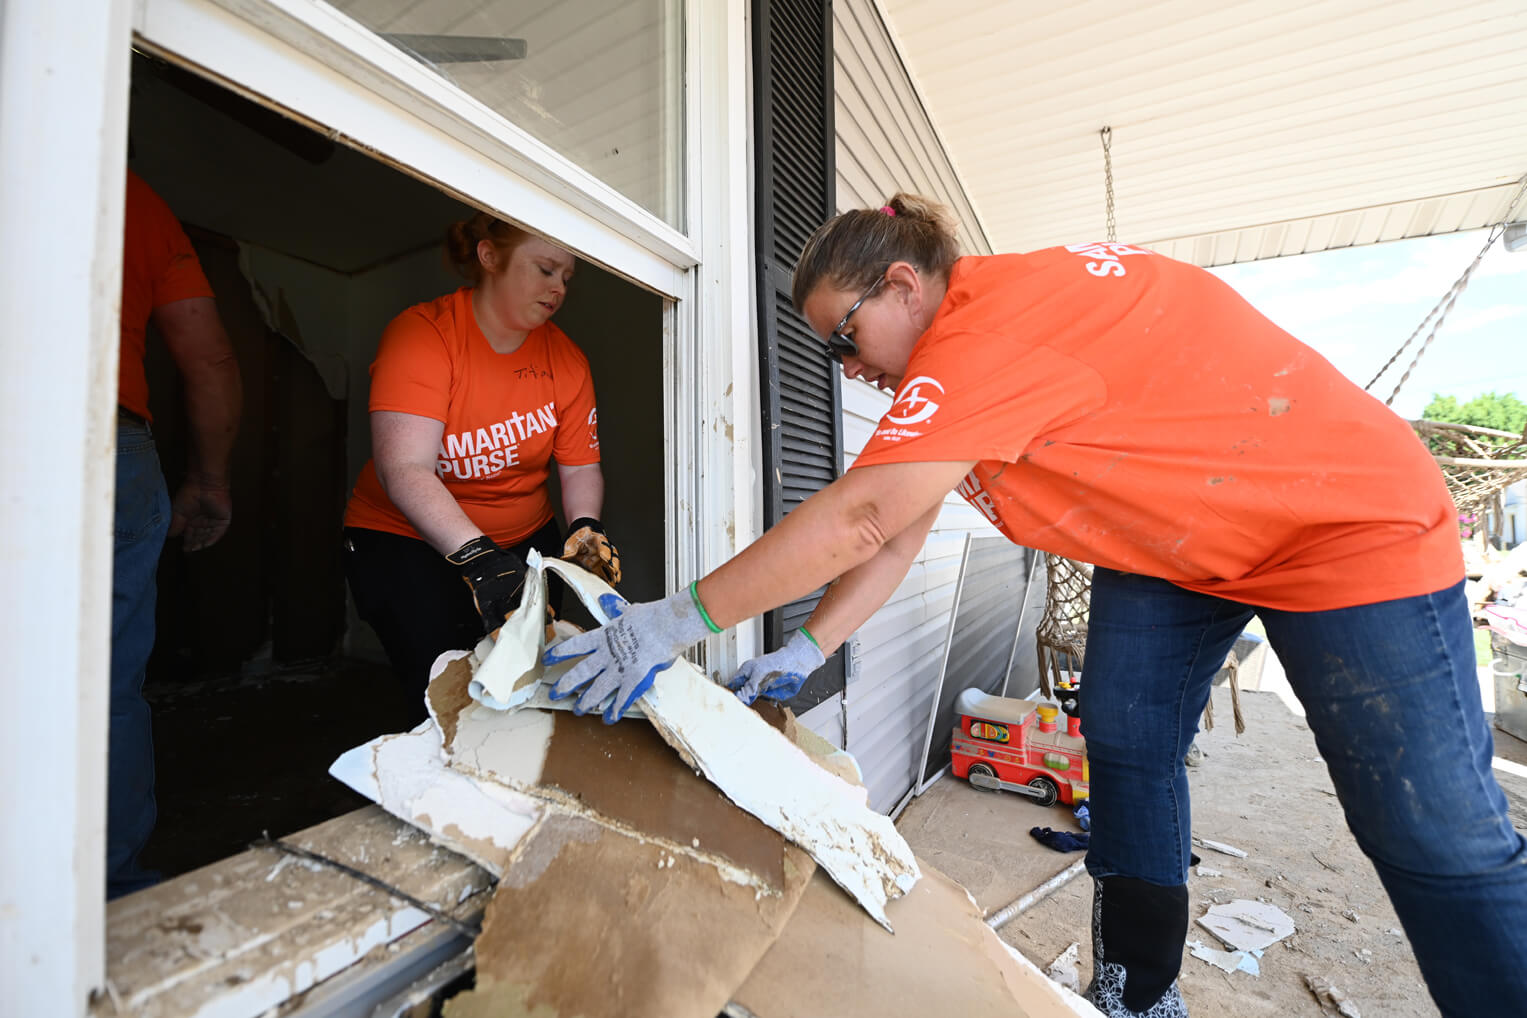 Volunteers are hard at work helping these struggling families in eastern Kentucky.